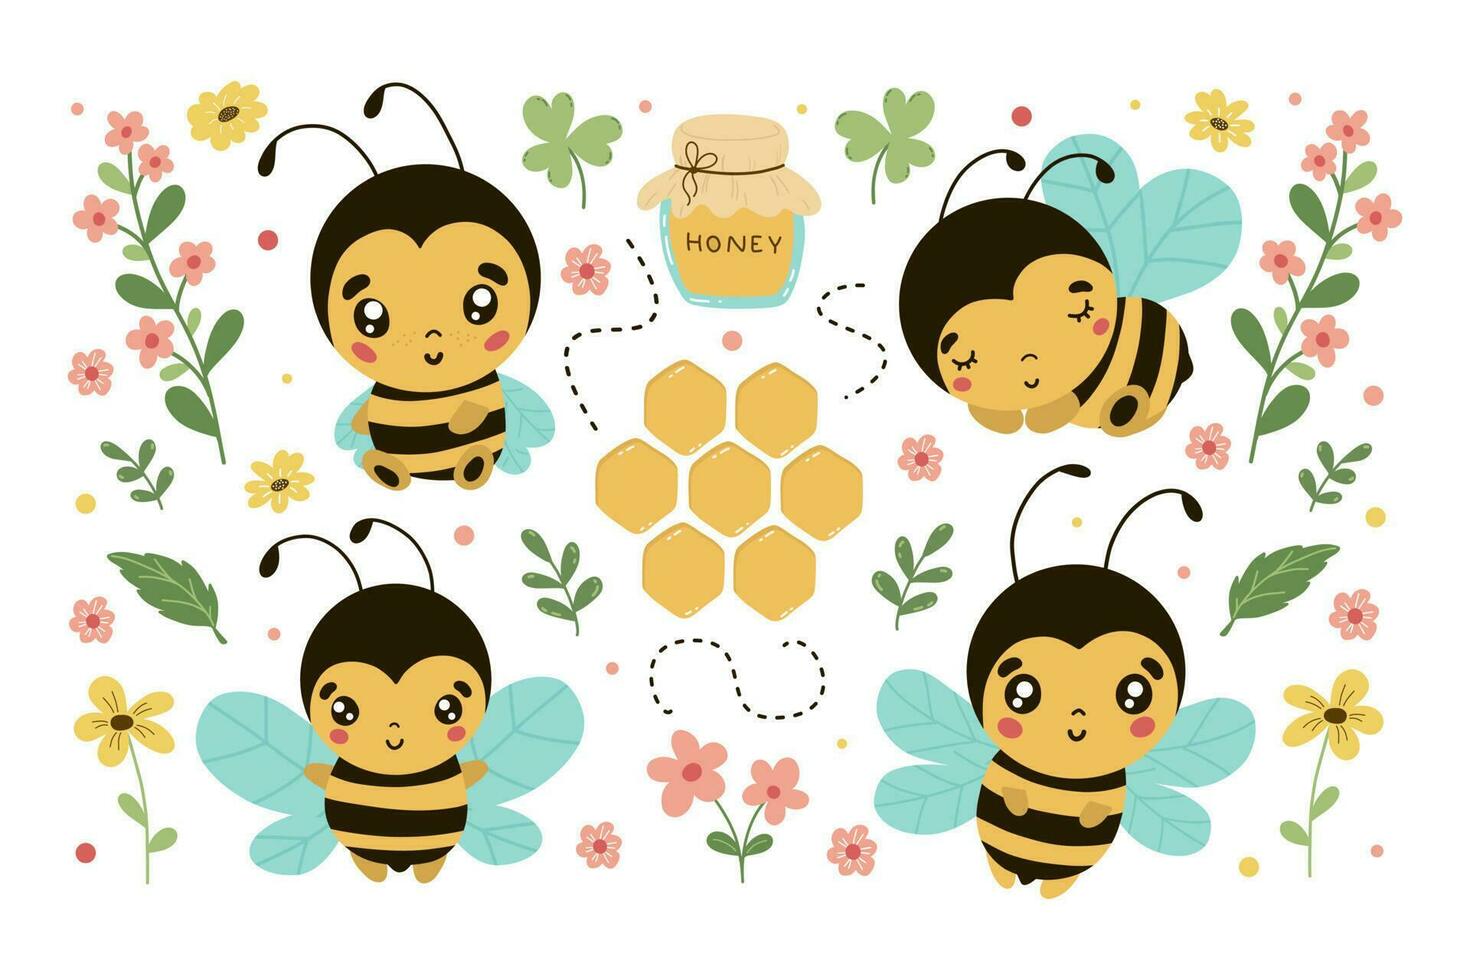 Funny bees with flowers and more. Vector naive characters in scandinavian hand-drawn cartoon style. Isolated characters on a white background.